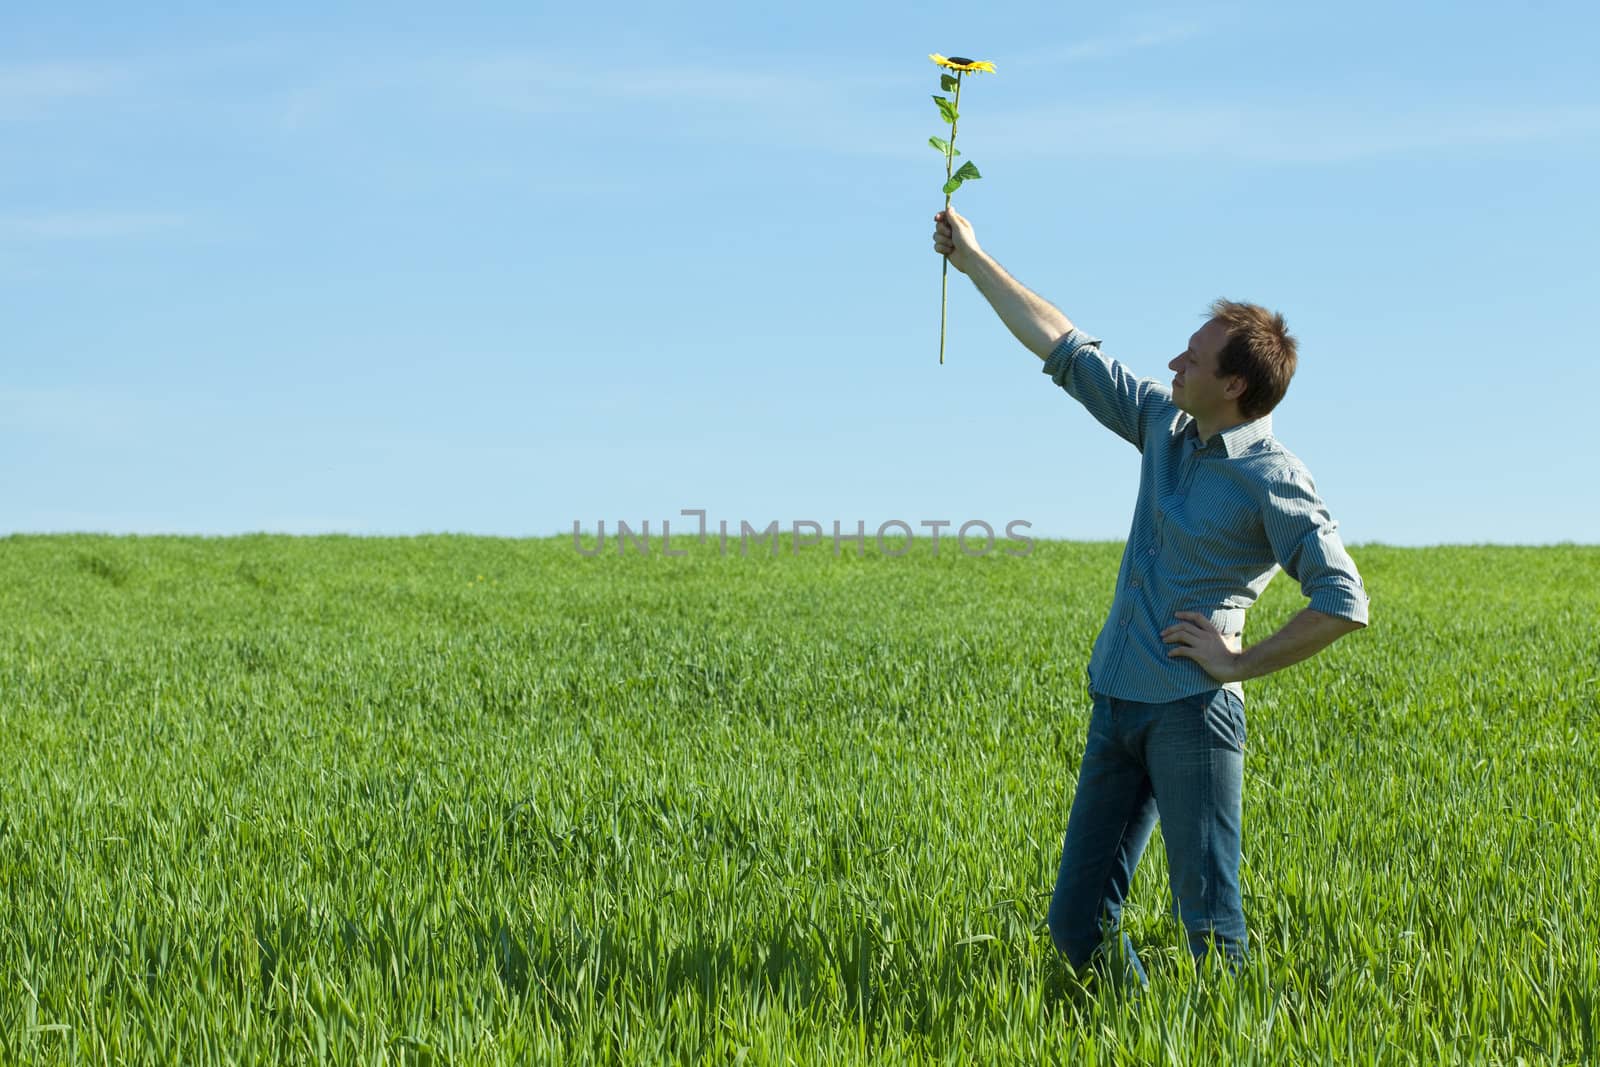 young man standing with a sunflower in the green field 